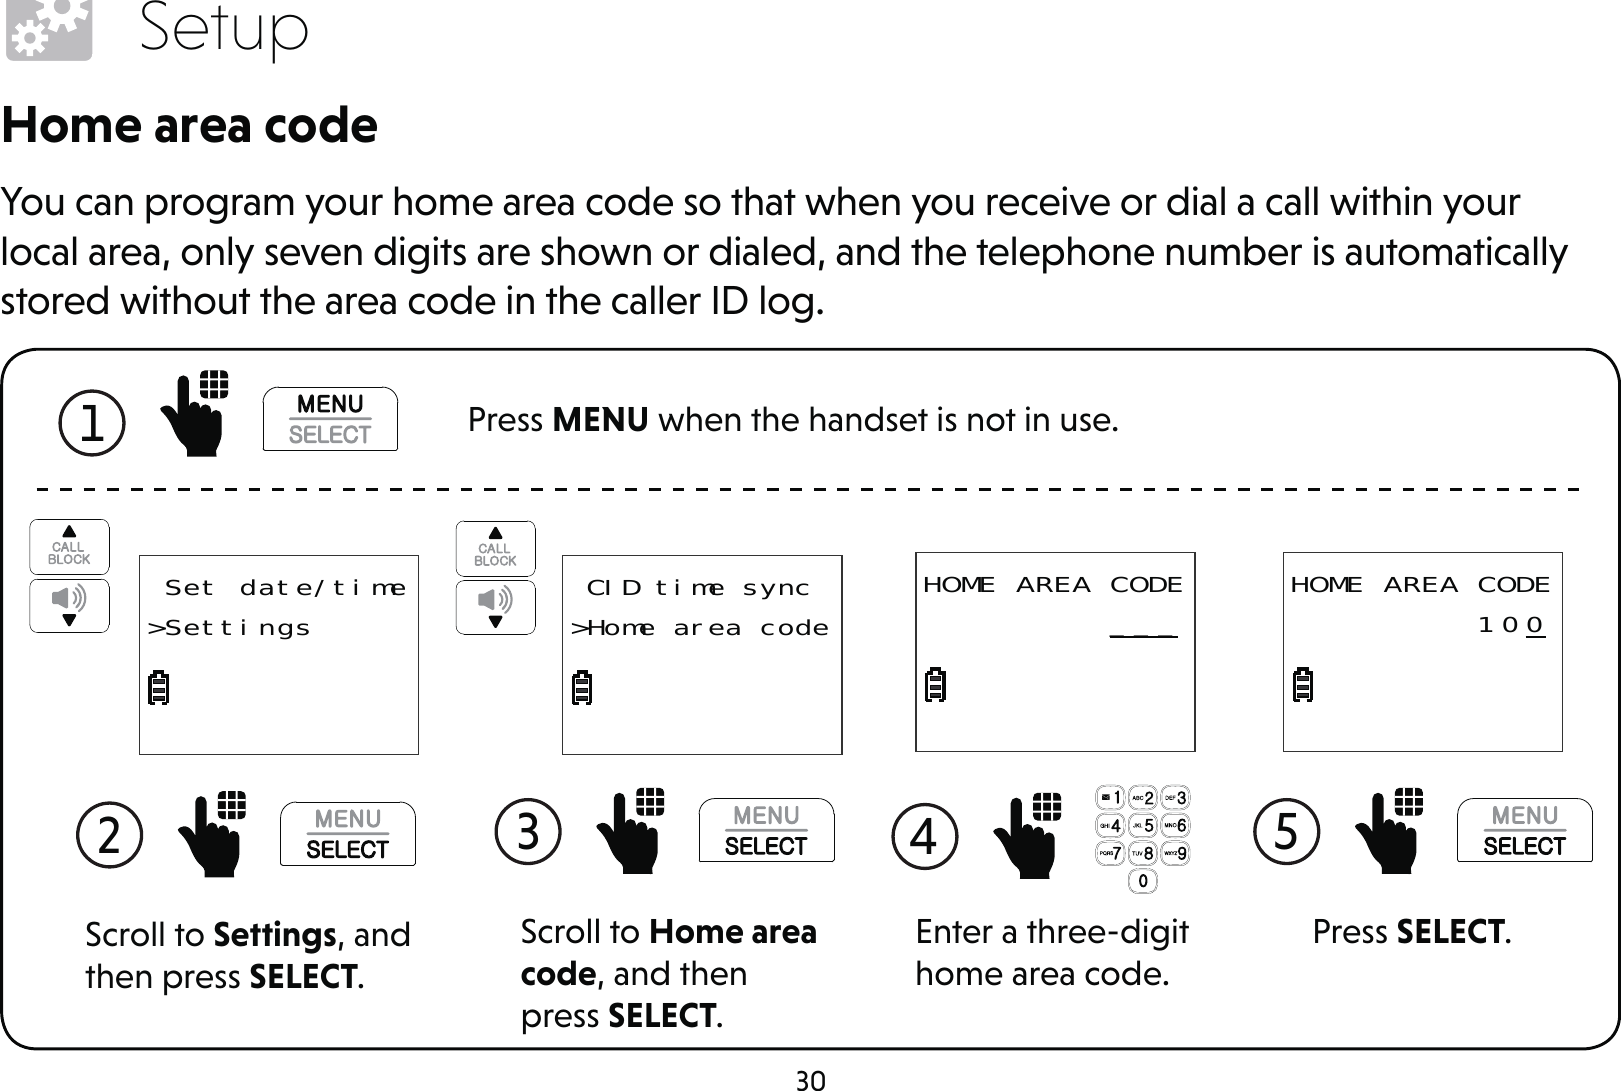 30SetupHome area codeYou can program your home area code so that when you receive or dial a call within your local area, only seven digits are shown or dialed, and the telephone number is automatically stored without the area code in the caller ID log.1  Press MENU when the handset is not in use.Scroll to Settings, and then press SELECT.2  Set date/time&gt;SettingsScroll to Home area code, and then press SELECT.3  CID time sync&gt;Home area codeEnter a three-digit home area code.4 HOME AREA CODE          ___Press SELECT.5 HOME AREA CODE          100